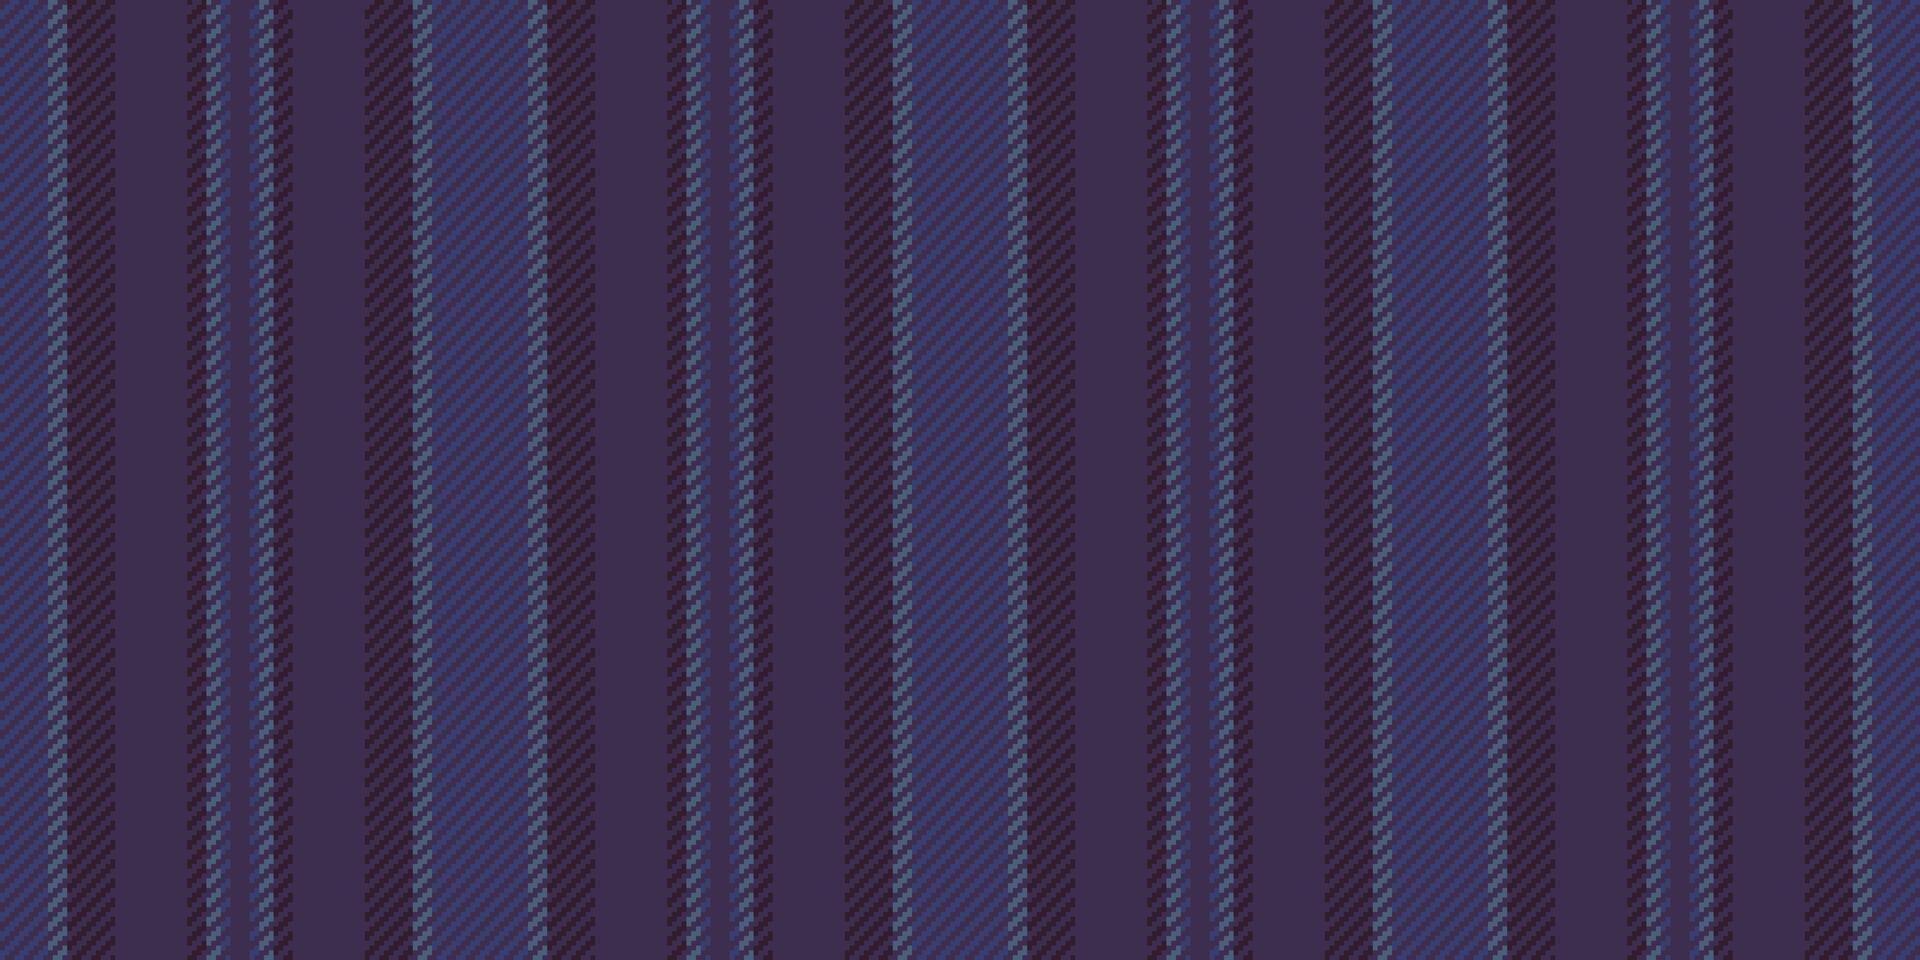 Fibrous textile fabric vertical, thanksgiving pattern background lines. Surface stripe vector texture seamless in violet and blue colors.